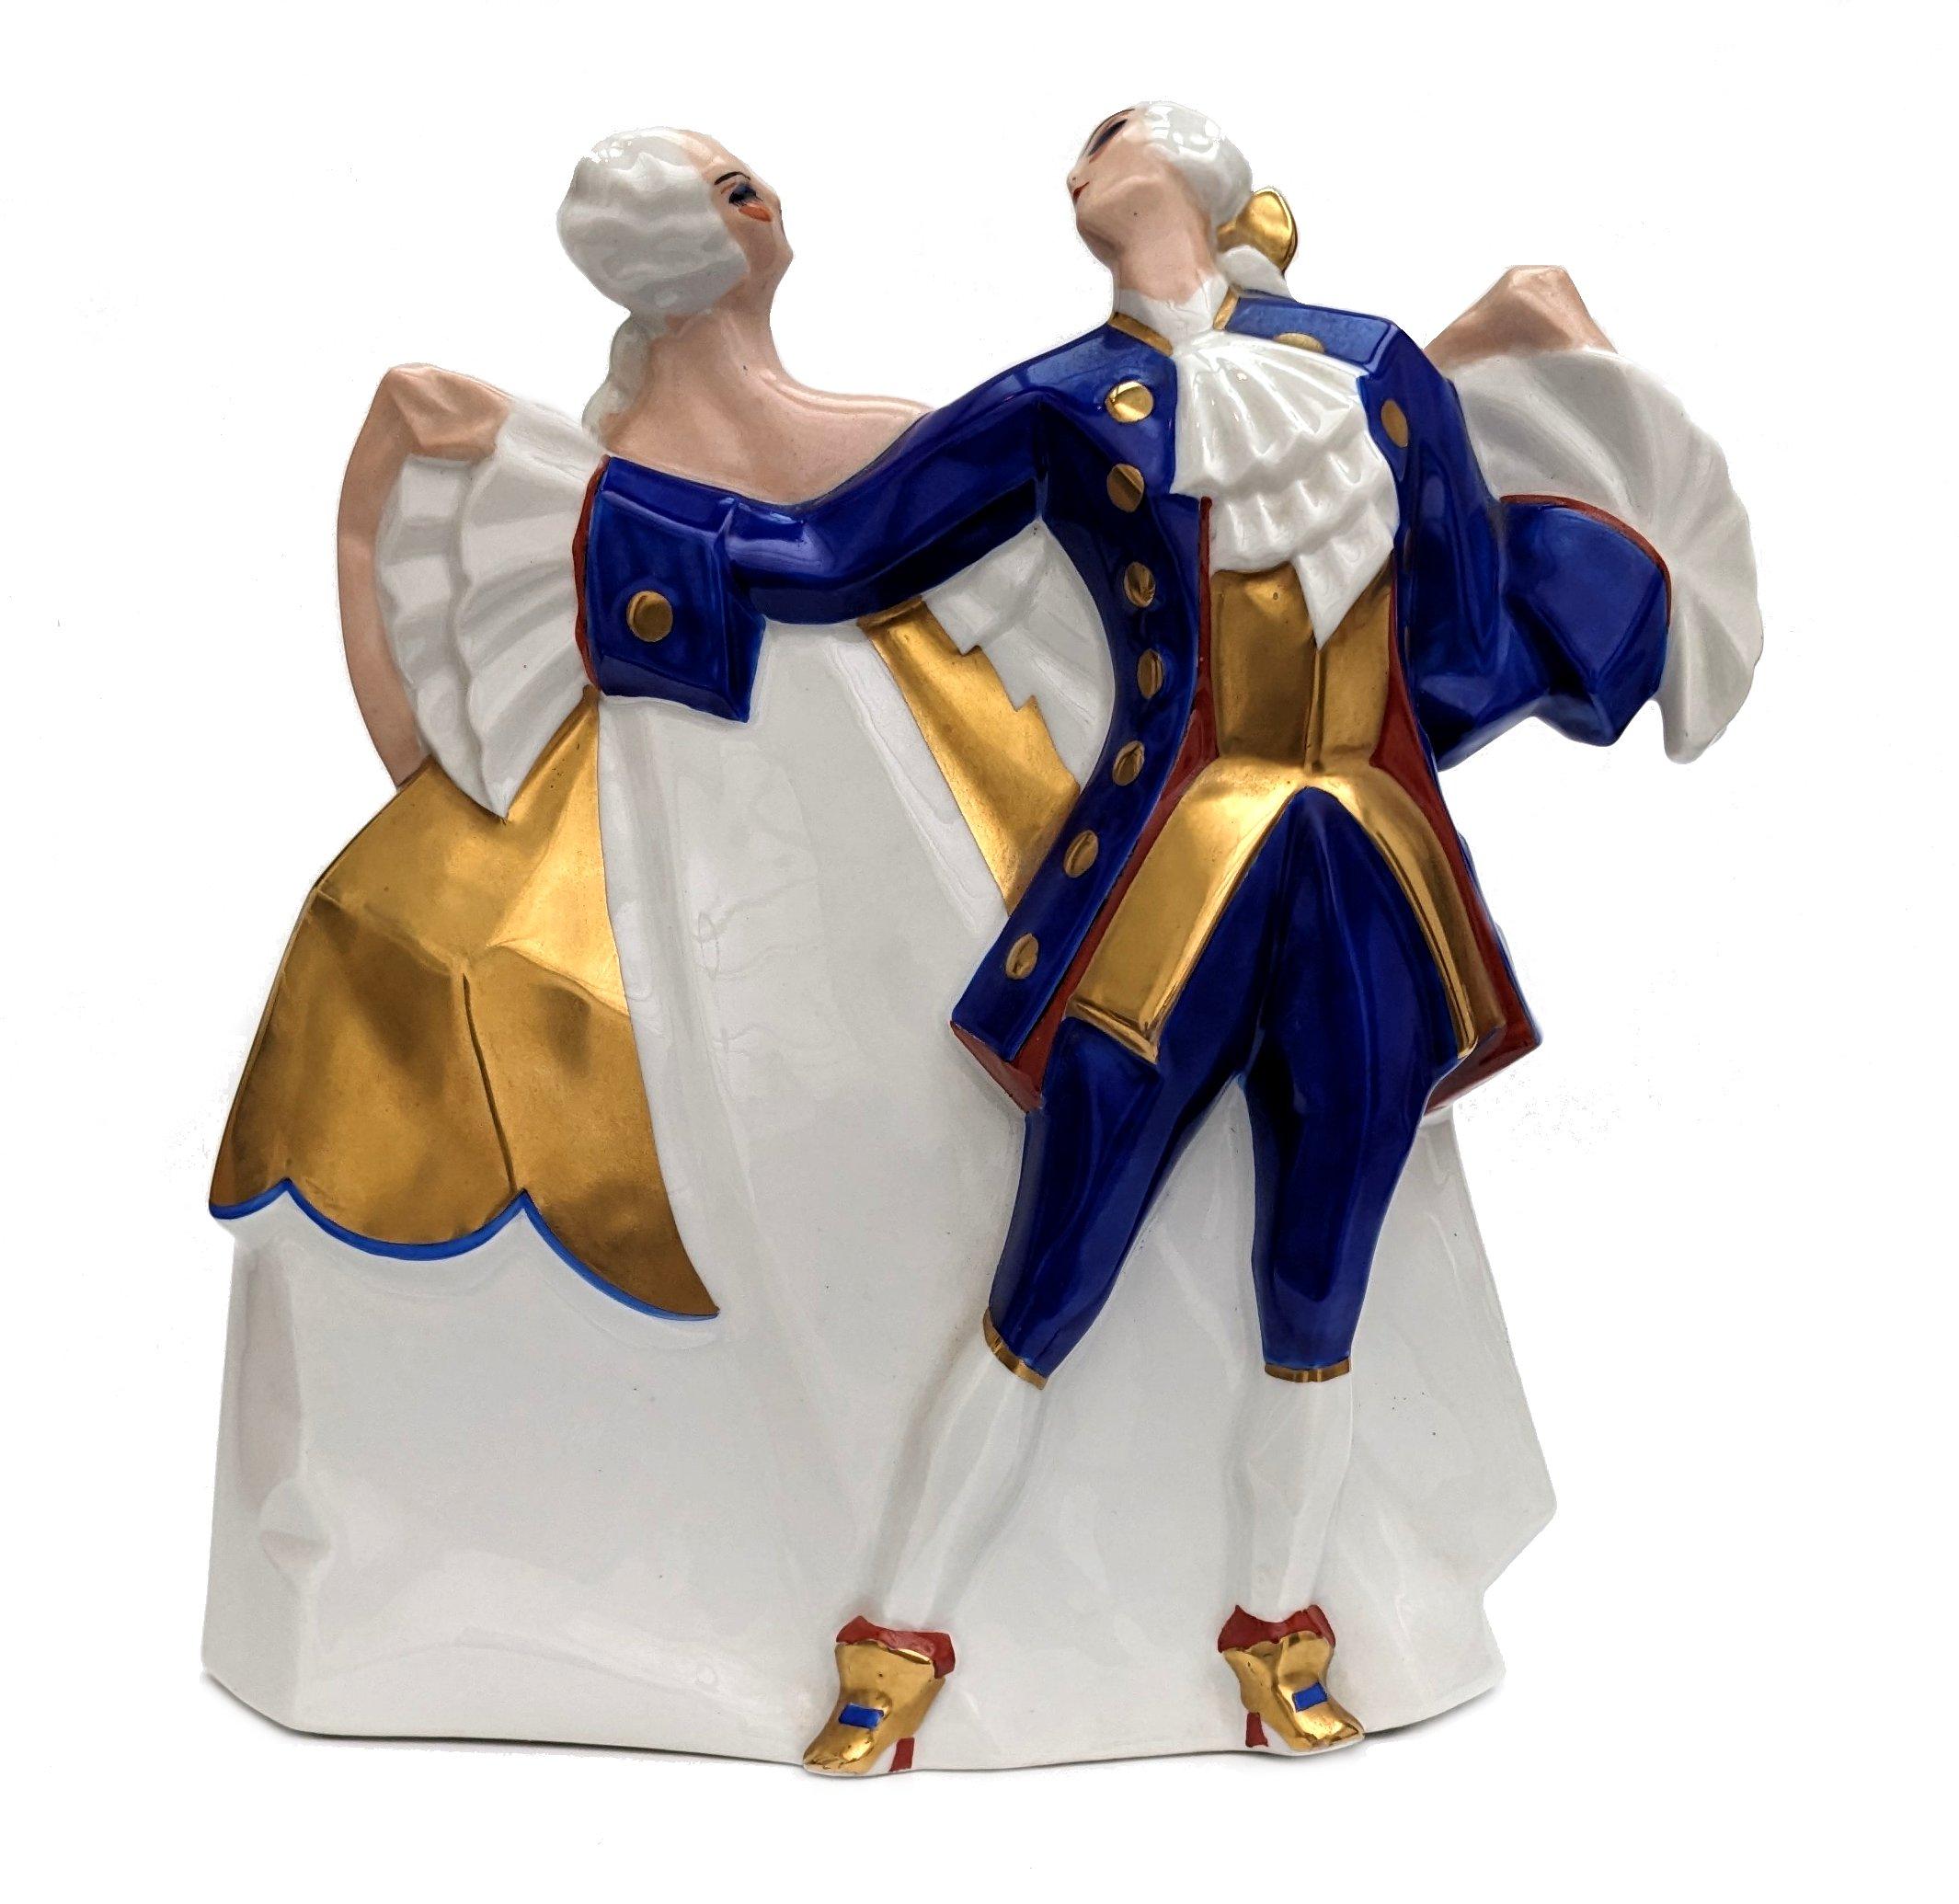 For you consideration is this large figural group beautiful and rare, dating to the 1930's France porcelain sculpture in polychrome. Features a stylised pair of eighteenth-century noble dancing, perhaps, the minuet. These figures were initially made